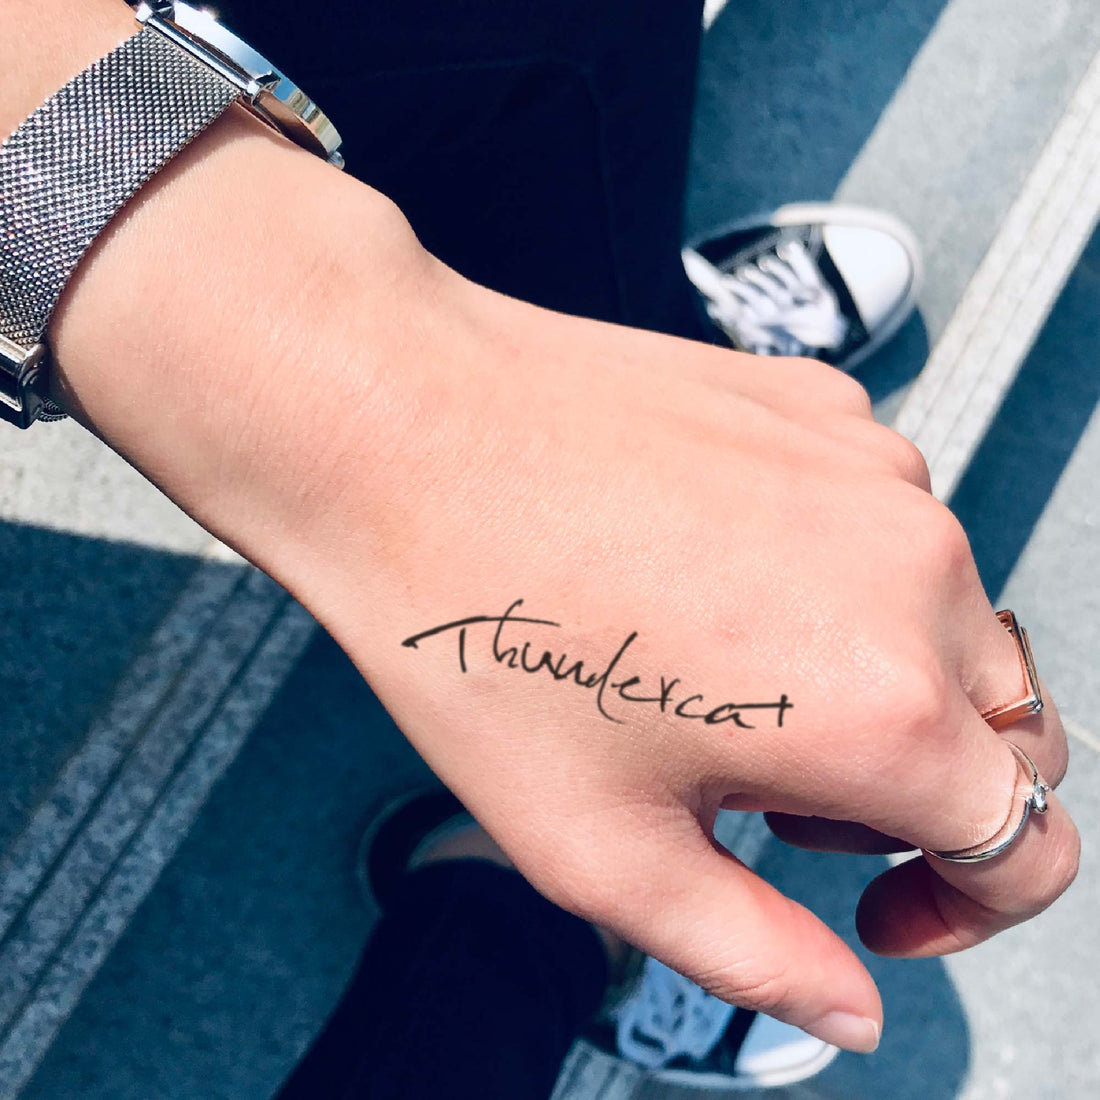 Thundercat custom temporary tattoo sticker design idea inspiration meanings removal arm wrist hand words font name signature calligraphy lyrics tour concert outfits merch accessory gift souvenir costumes wear dress up code